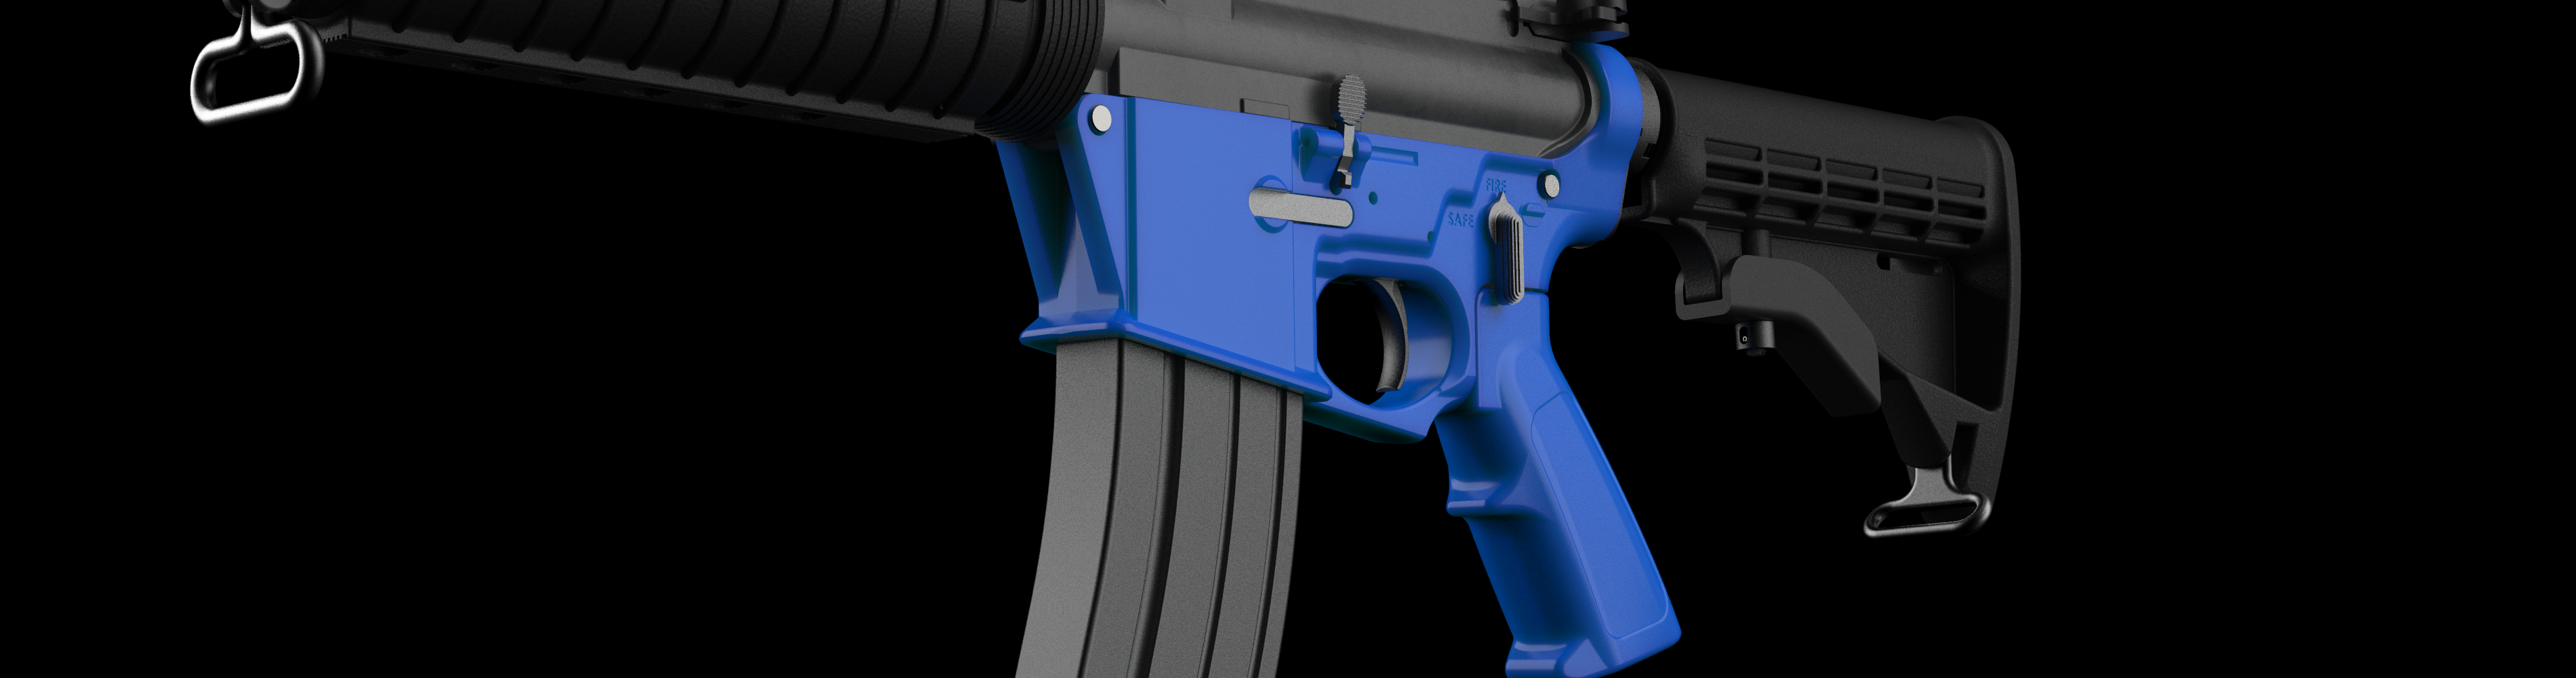 ar-15-3d-print-file-a-comprehensive-guide-to-downloading-and-printing